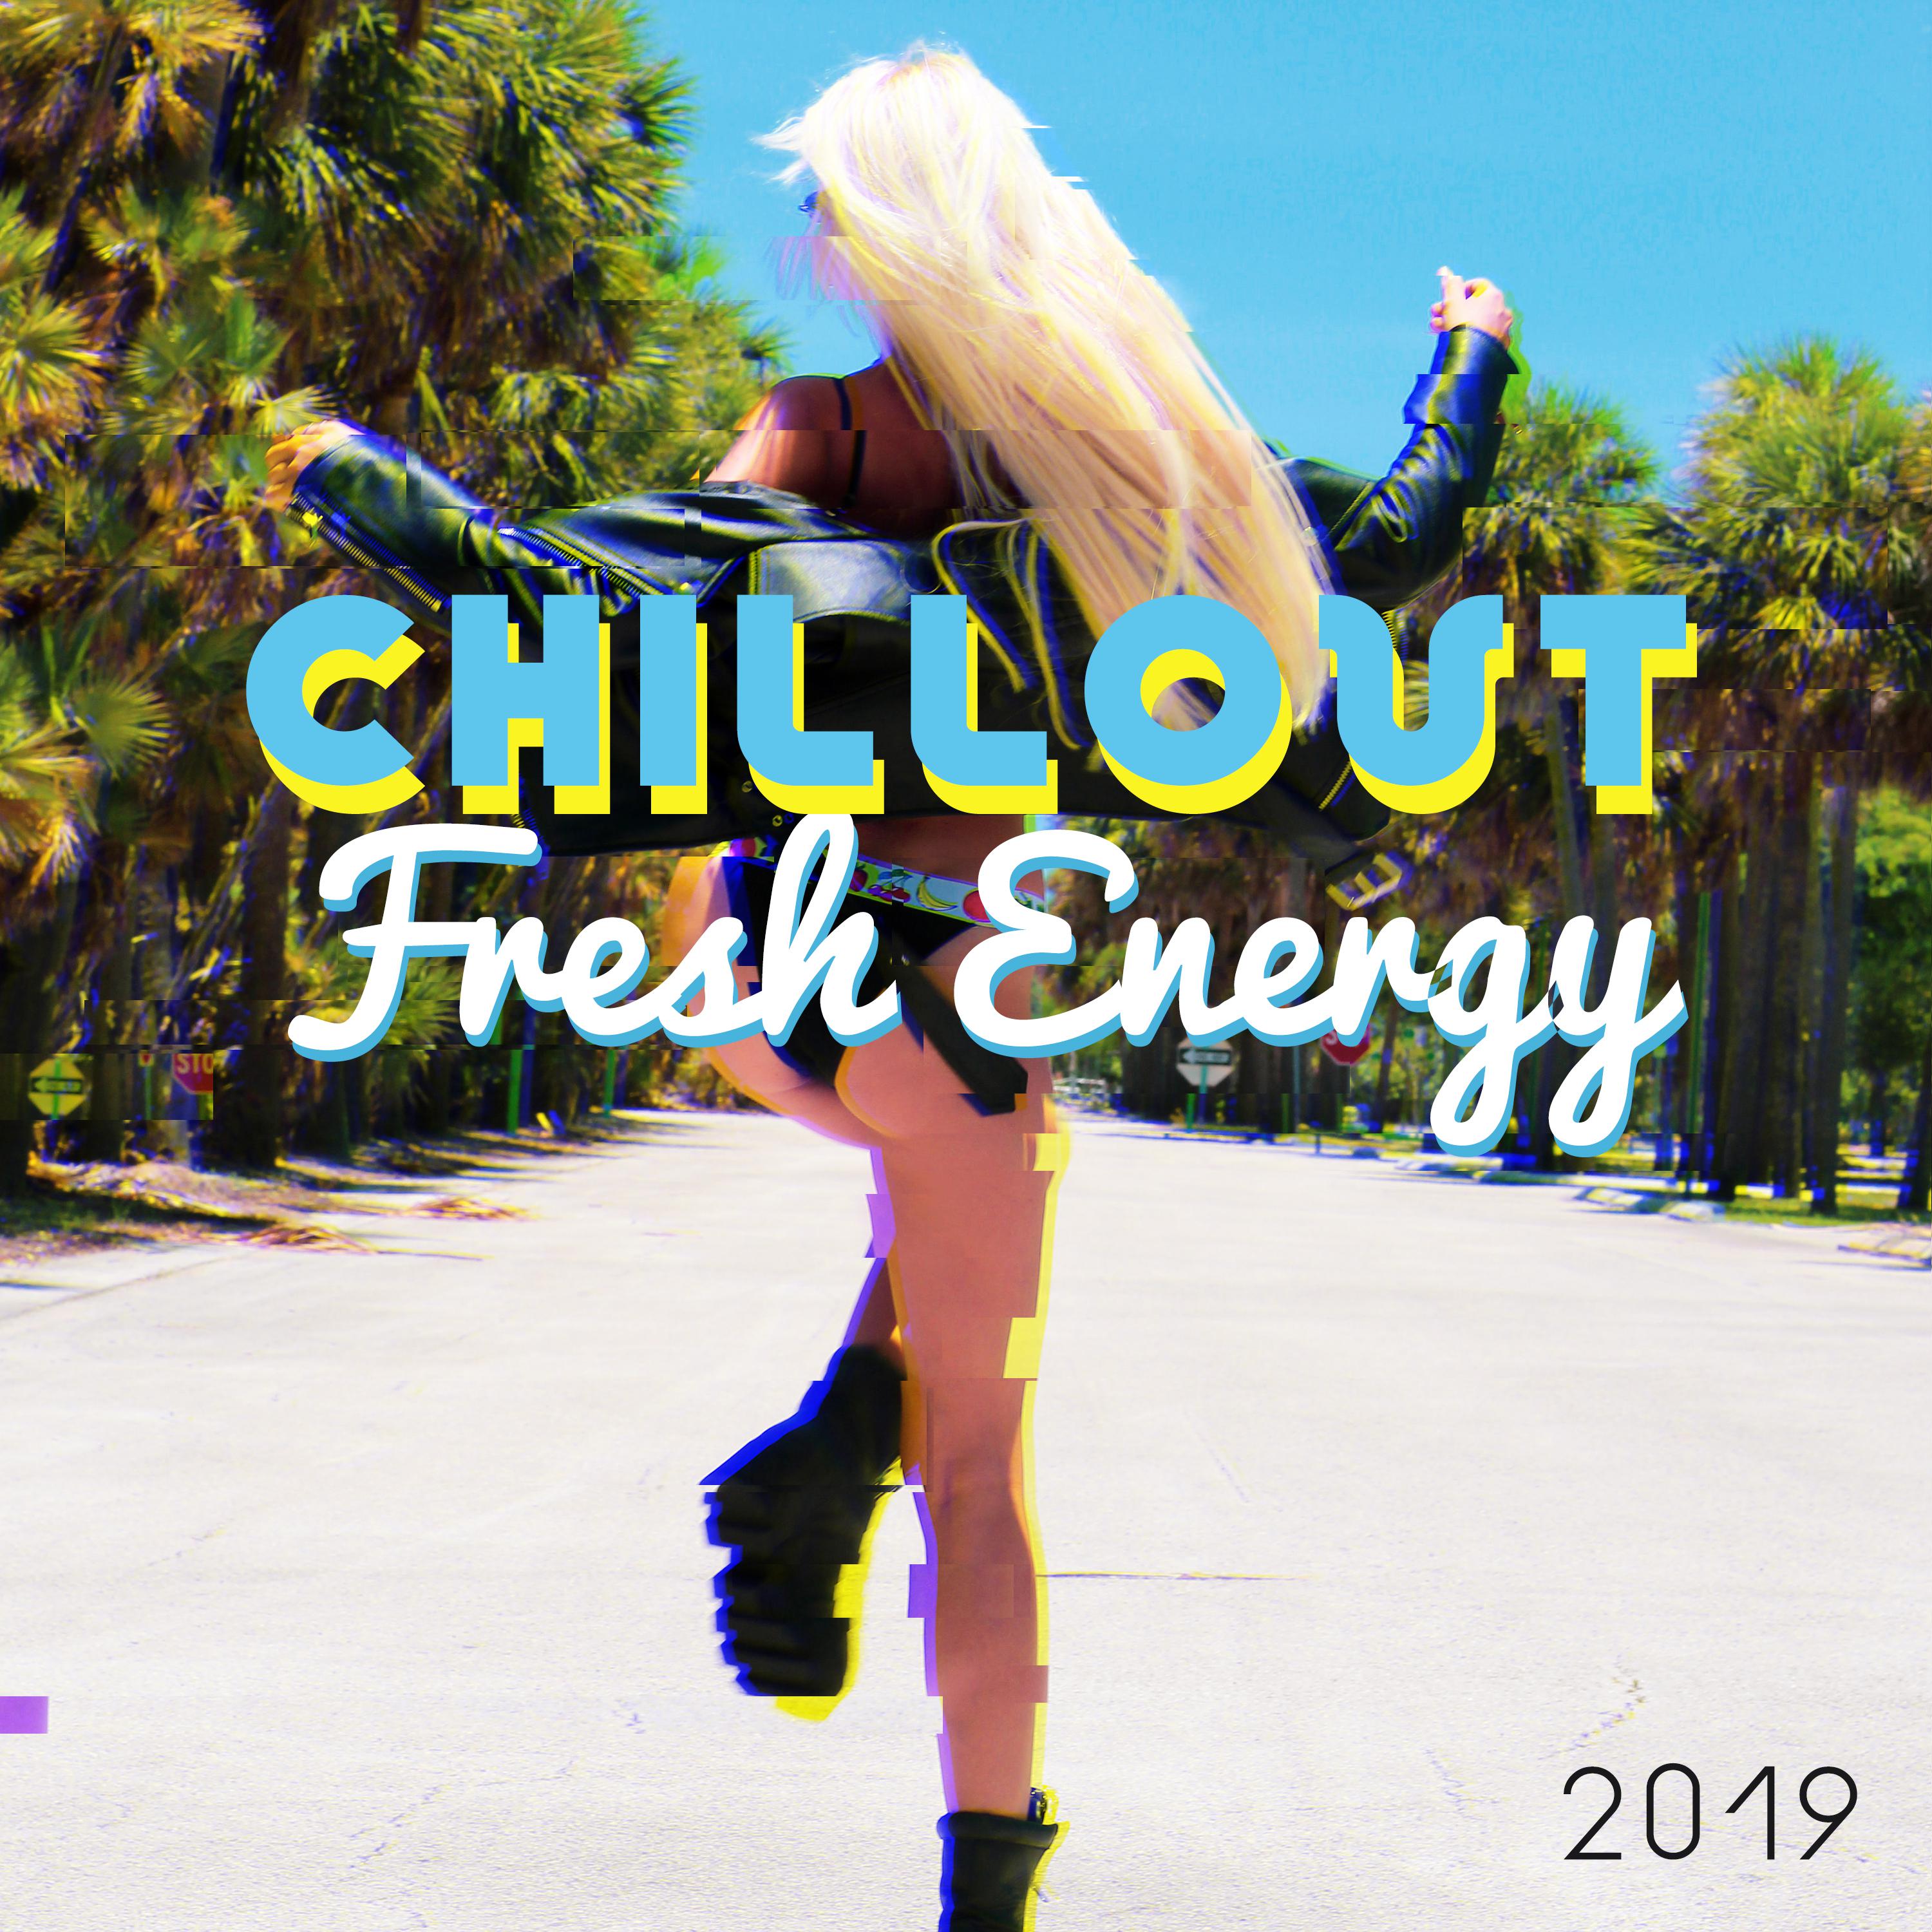 Chillout Fresh Energy 2019  Compilation of Top Chill Out Electronic Holiday Vibes, Sweet Melodies  Deep Pumping Beats, Music Perfect for Relaxation on the Beach or for the Pool Cocktail Party